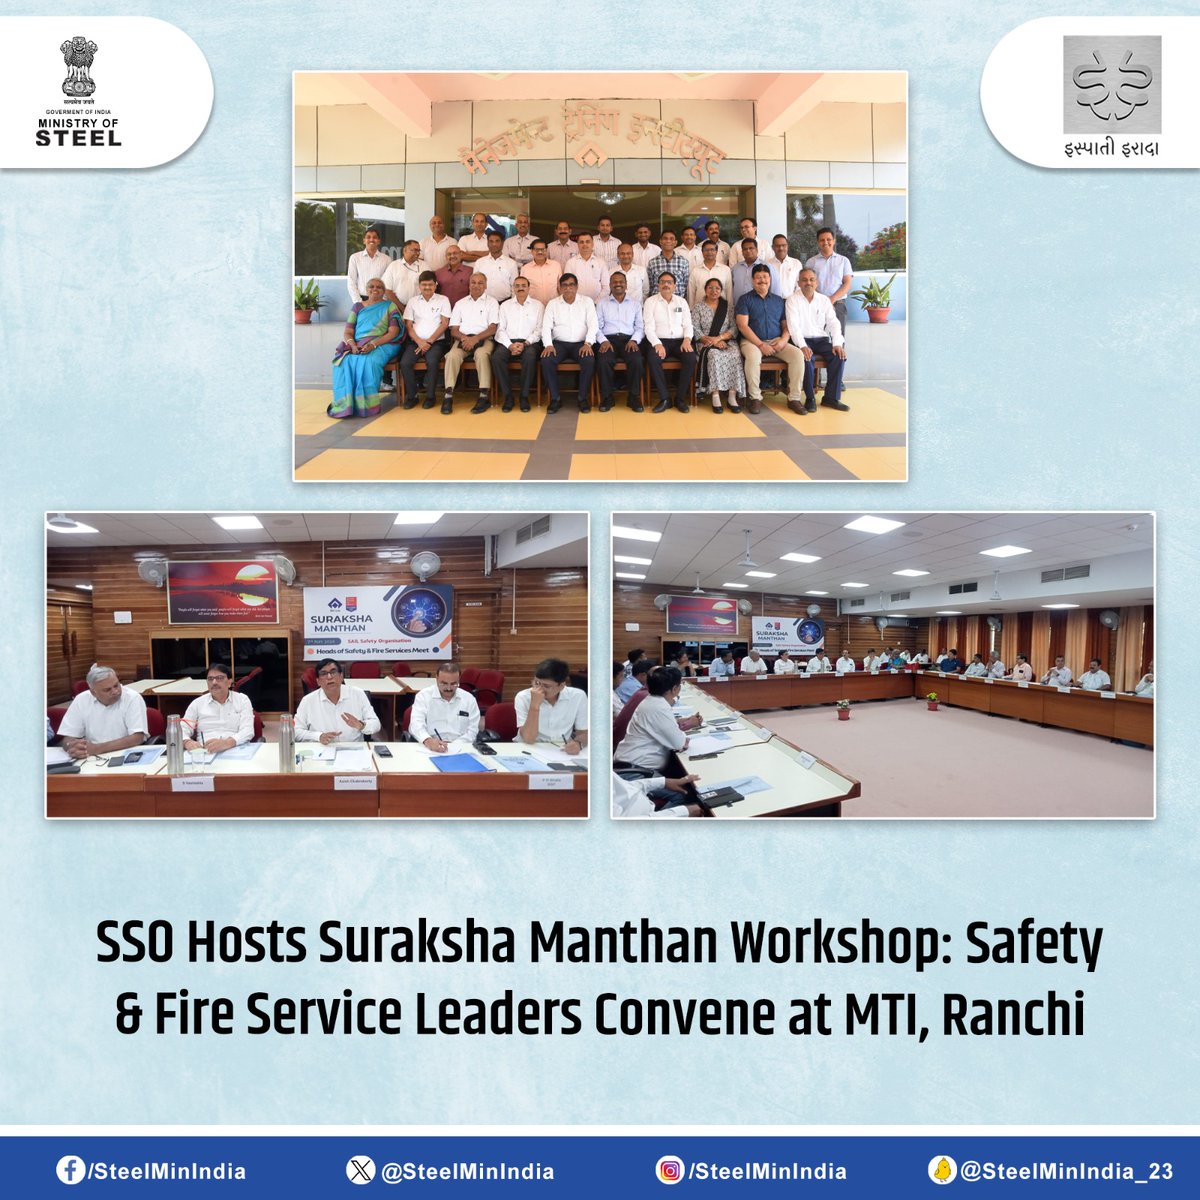 In a proactive move, #SSO organized Suraksha Manthan, bringing together safety & fire service heads to discuss crucial issues & share best practices for enhancing safety.

#SAIL #SafetyFirst #FireSafety #SurakshaManthan